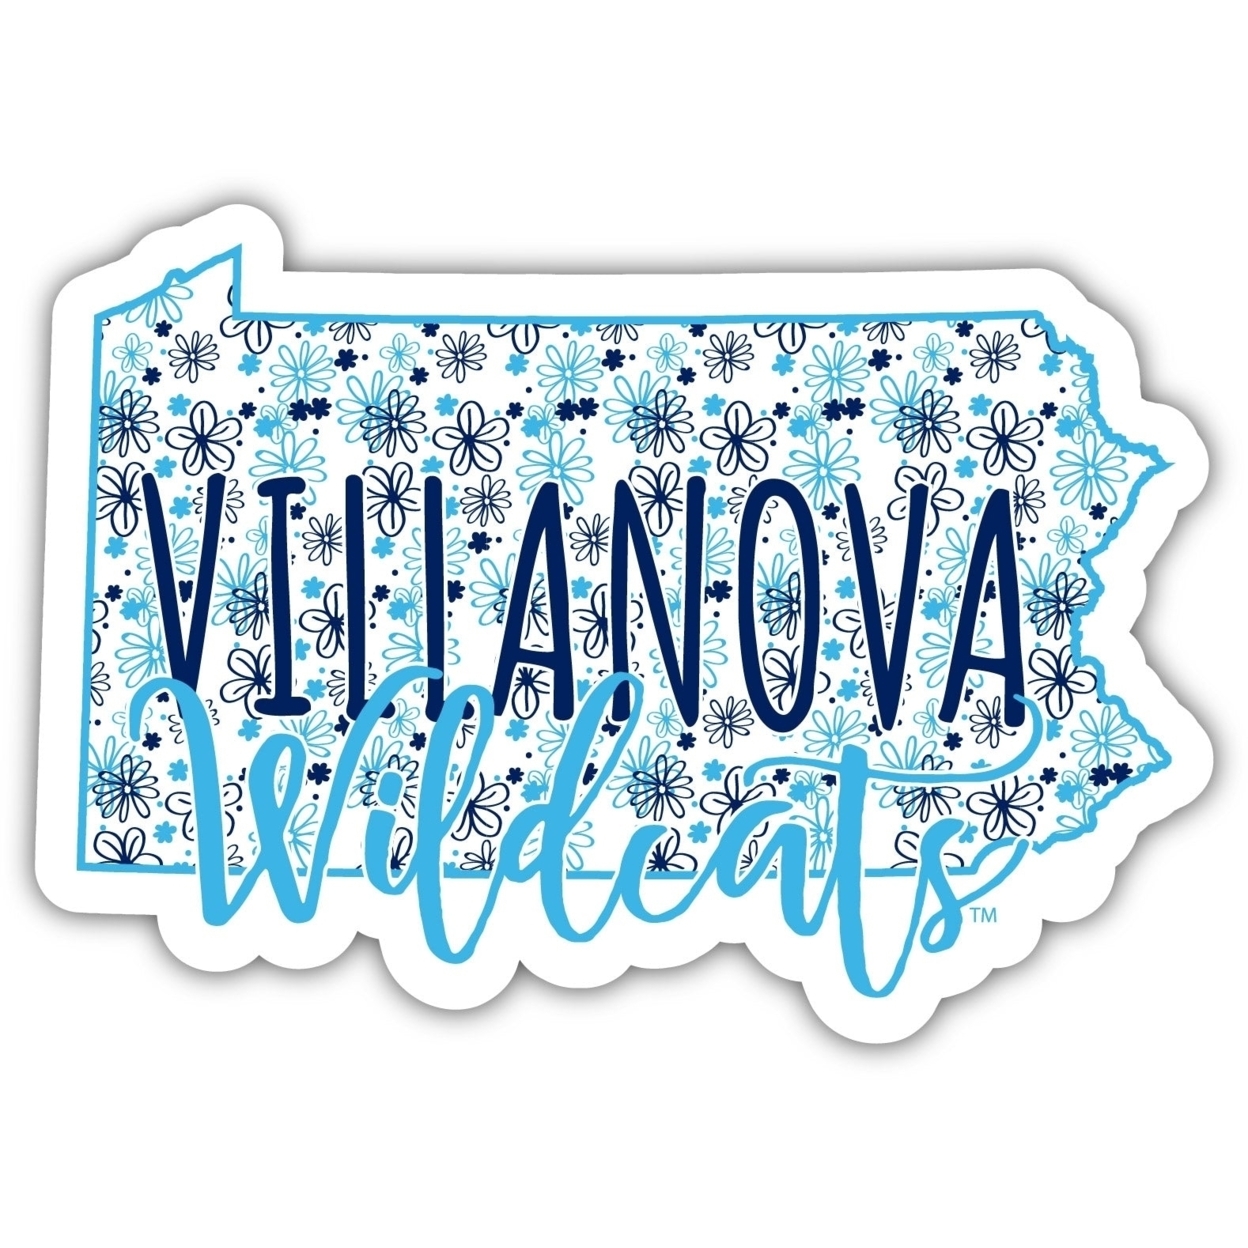 Virginia Commonwealth Floral State Die Cut Decal 4-Inch